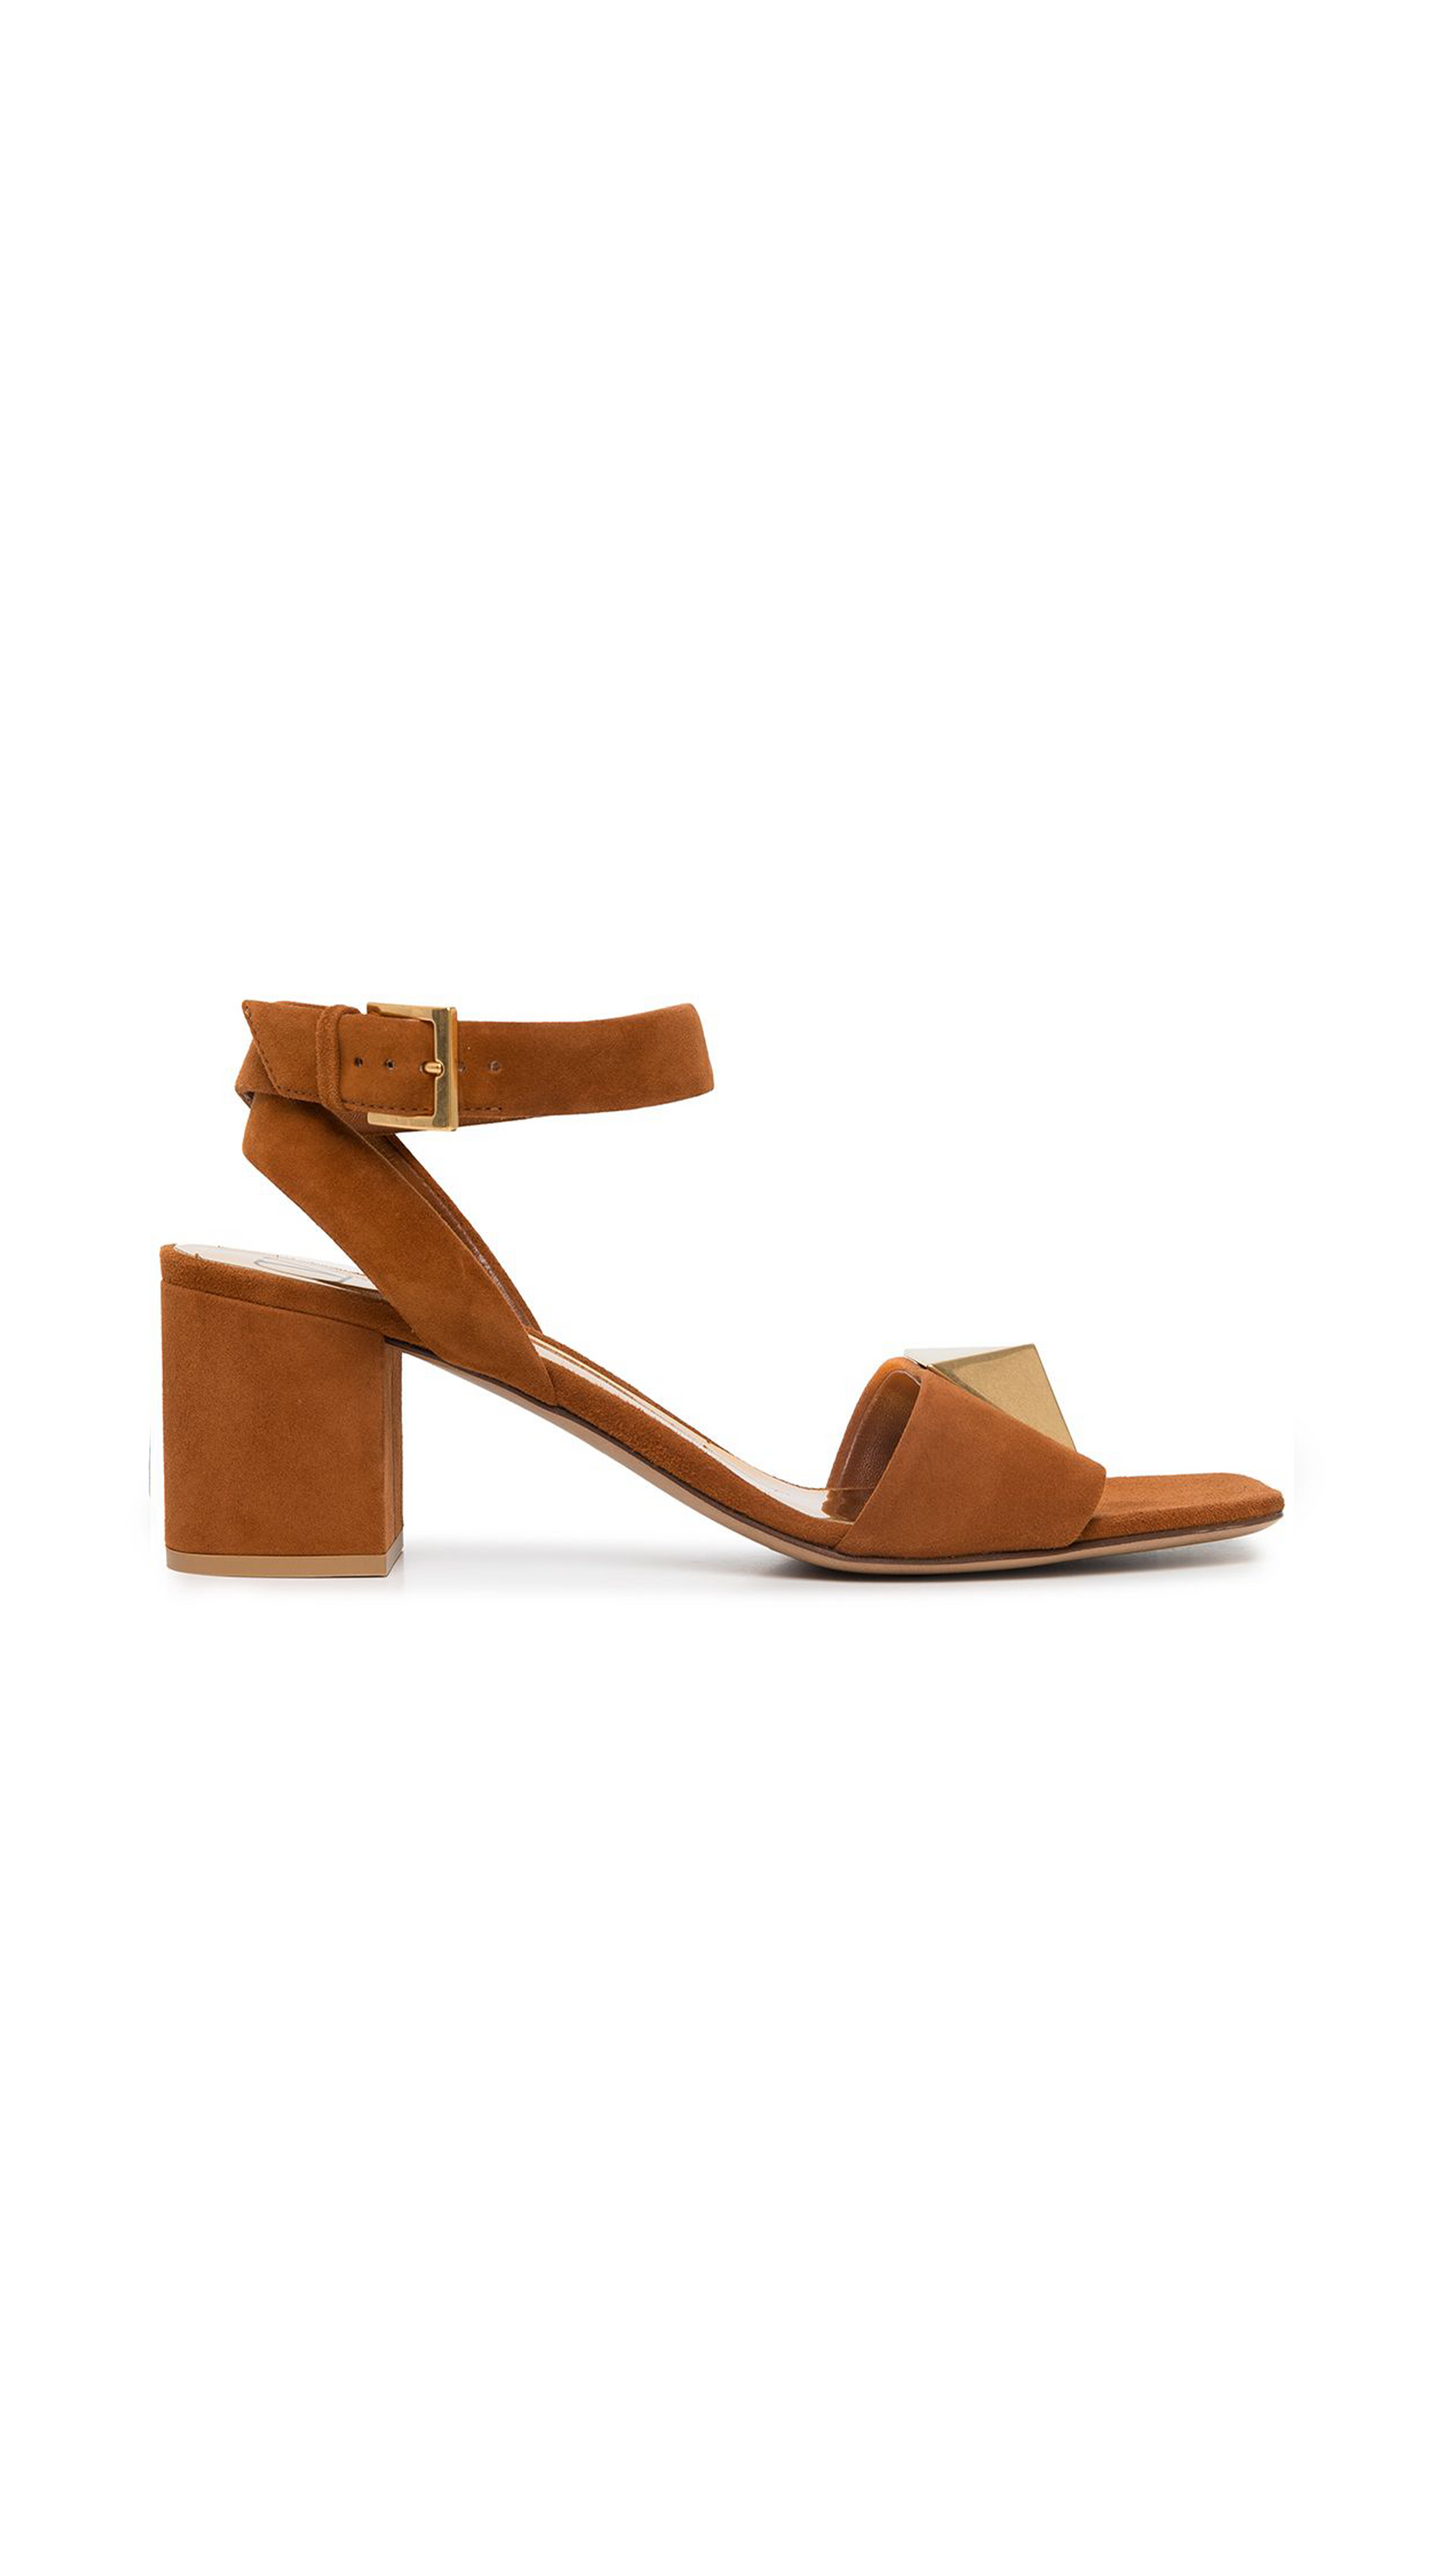 One Stud Sandal in Suede With Maxi Stud - Saddle Brown